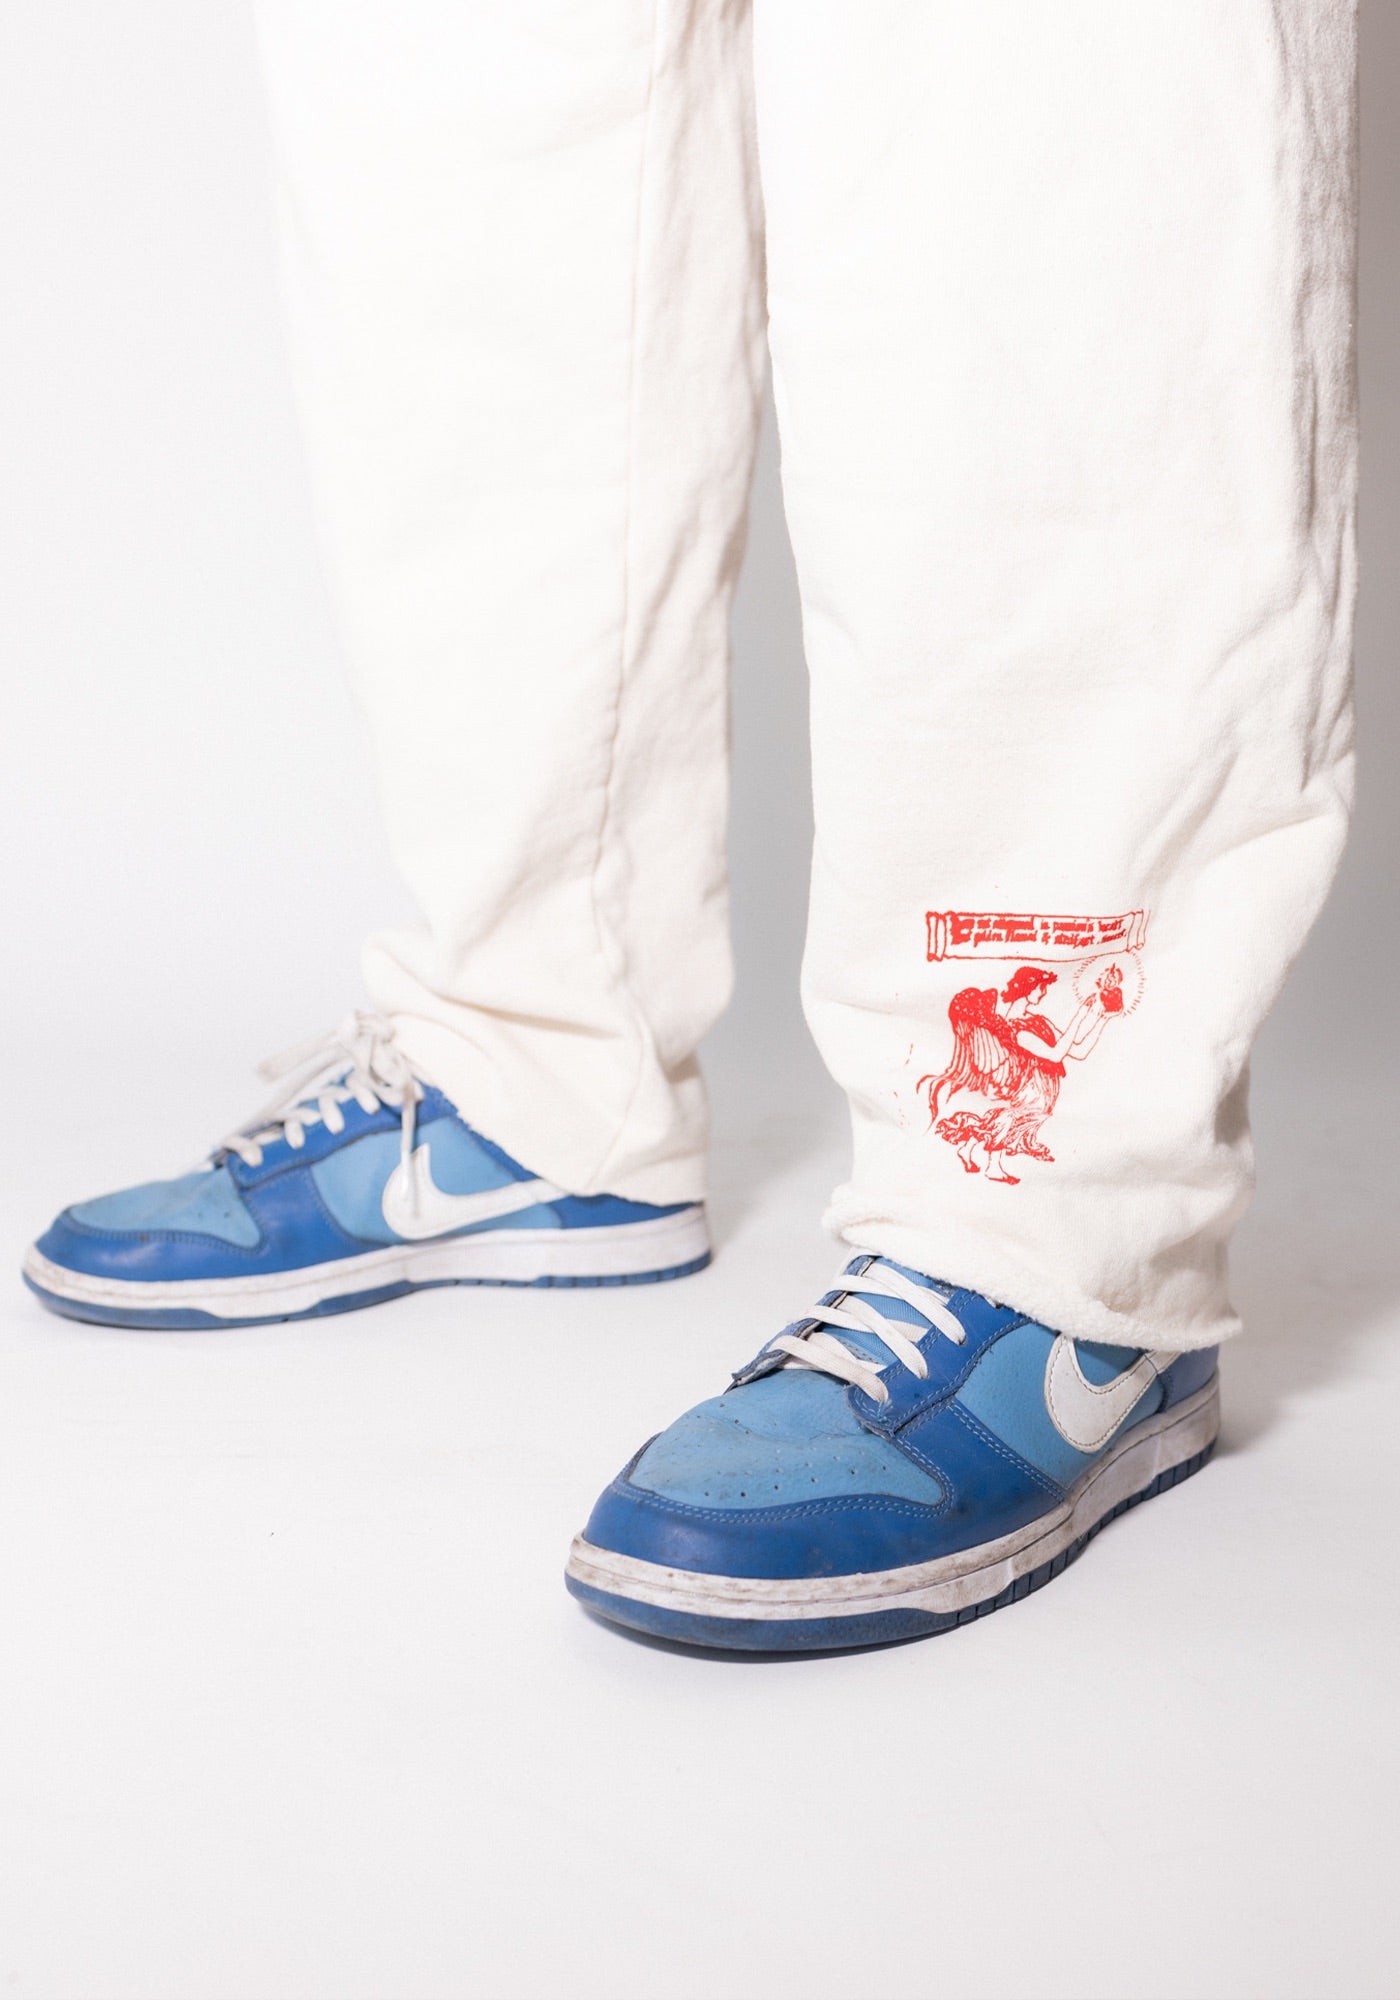 Cream Recycled Cotton Cut Sweatpants